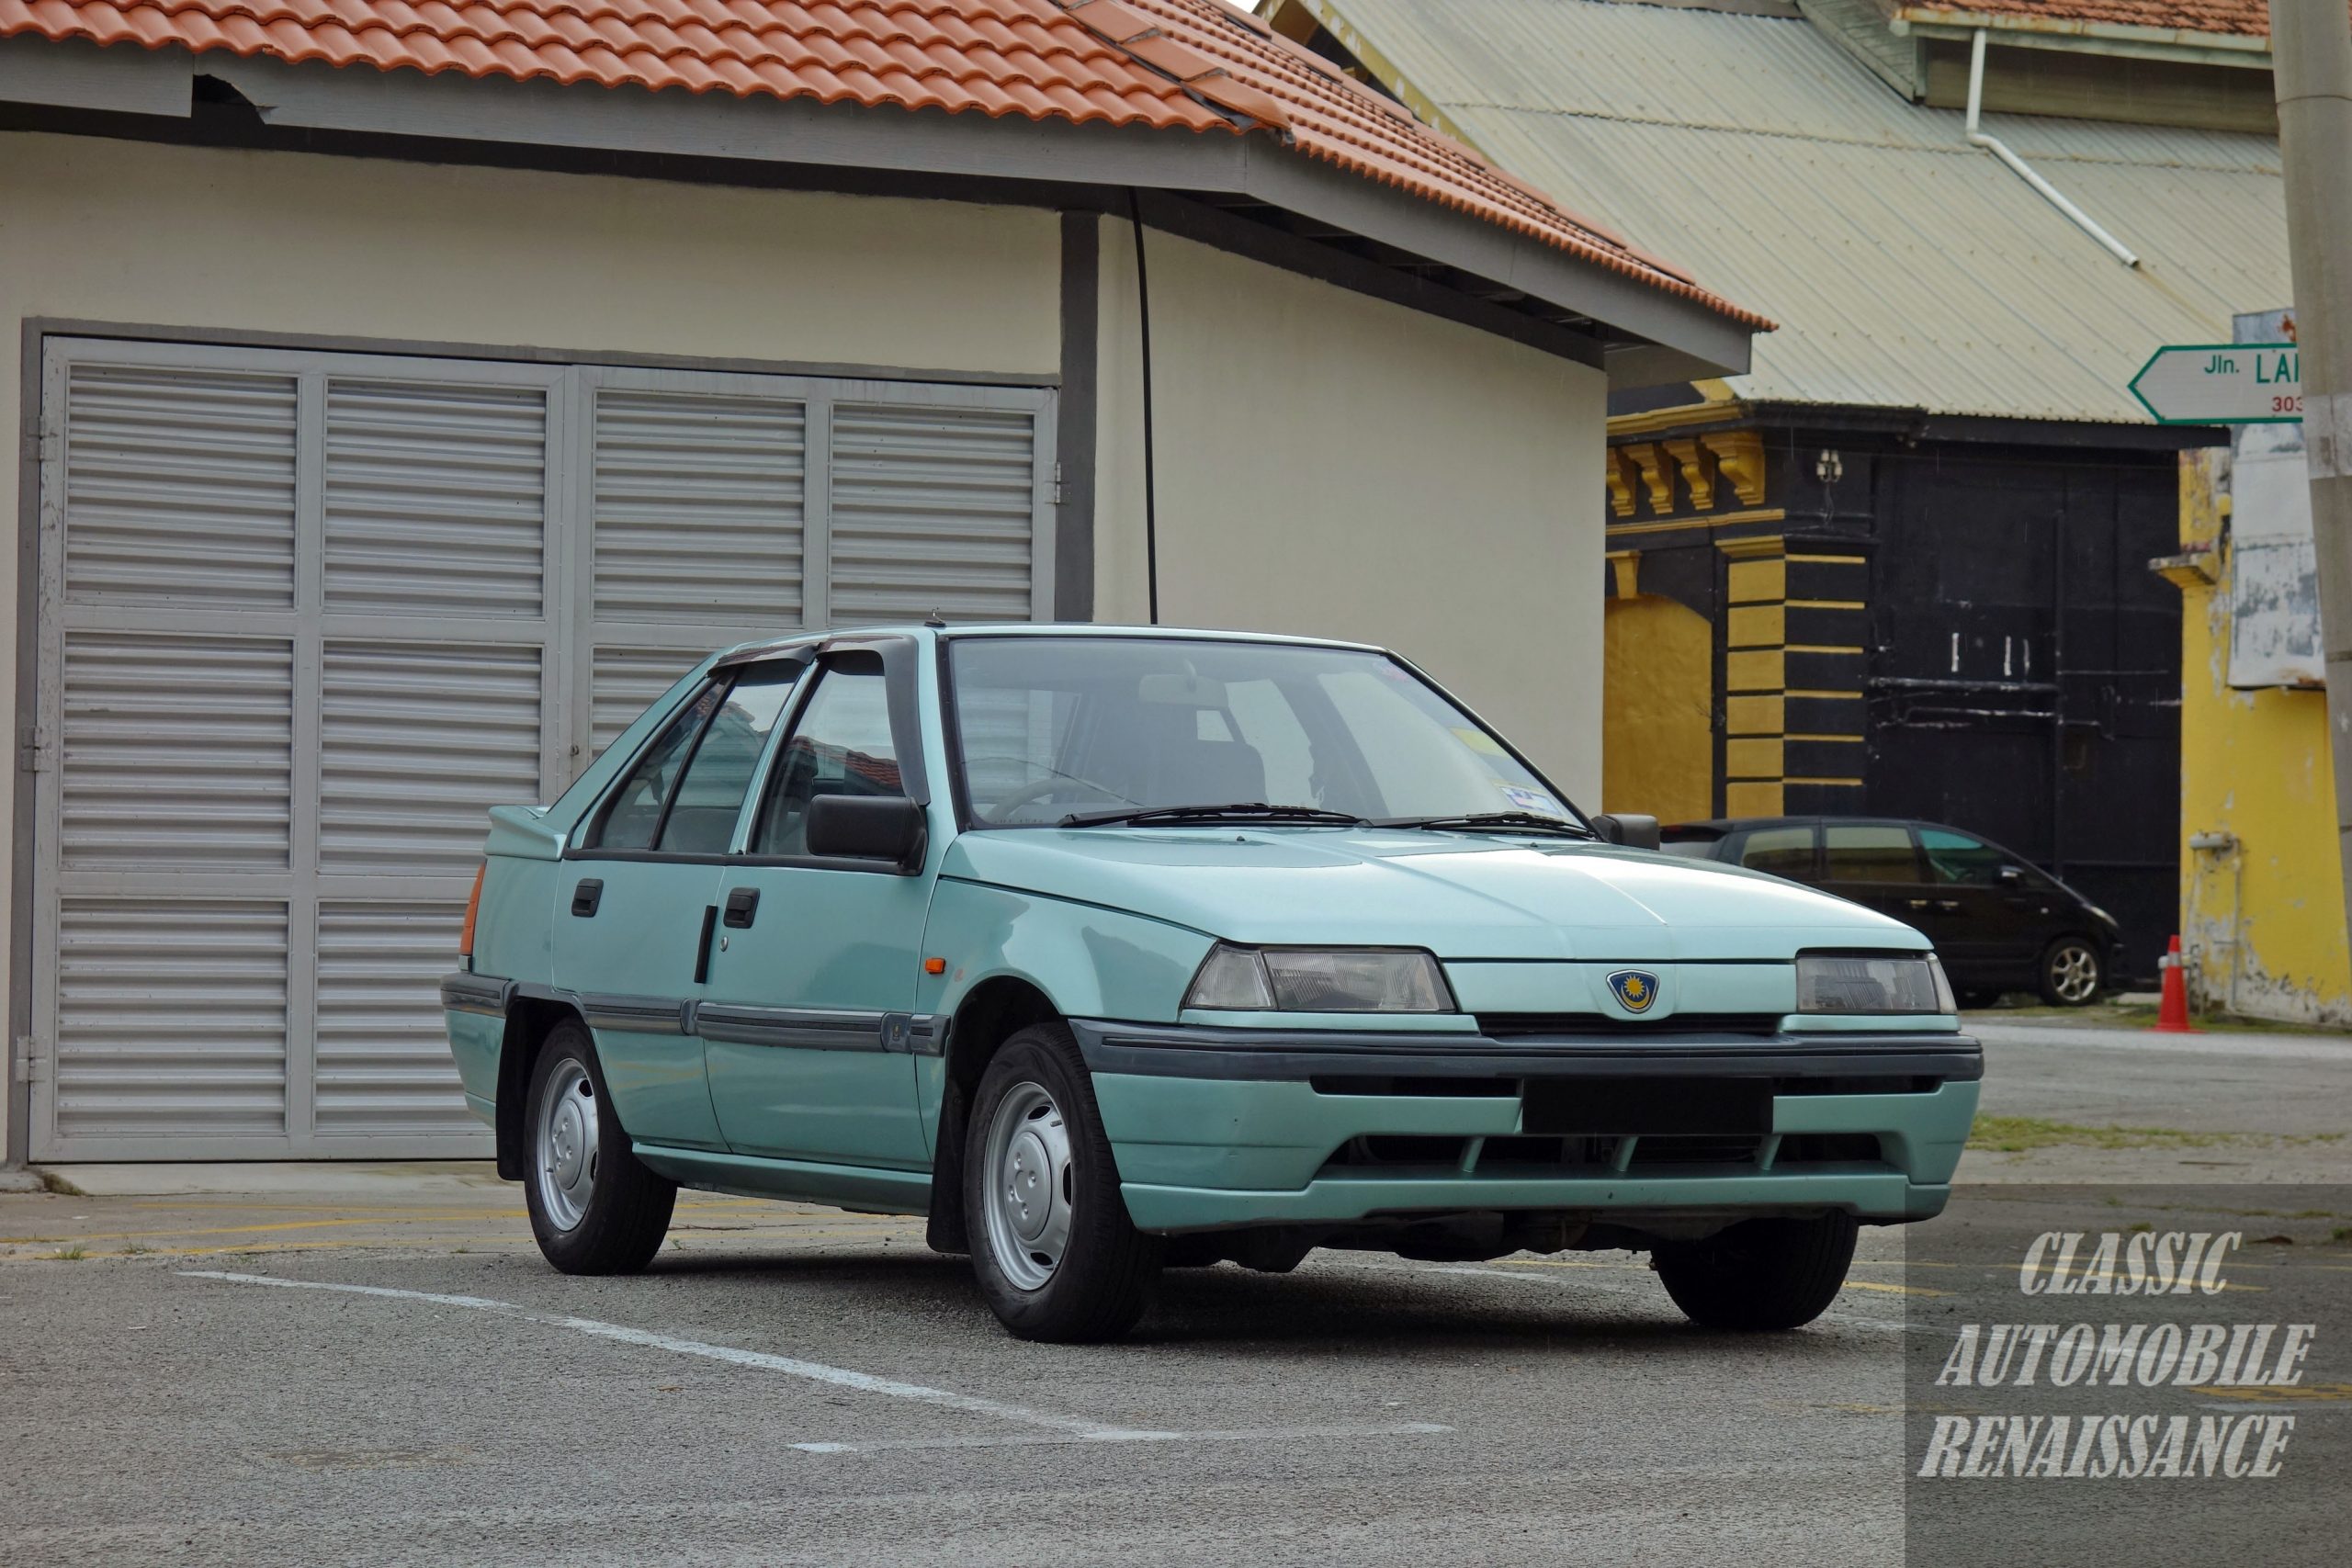 After 5 years of ownership, Ken's Proton Saga continues to serve him faithfully. Image credit: Classic Automobile Renaissance